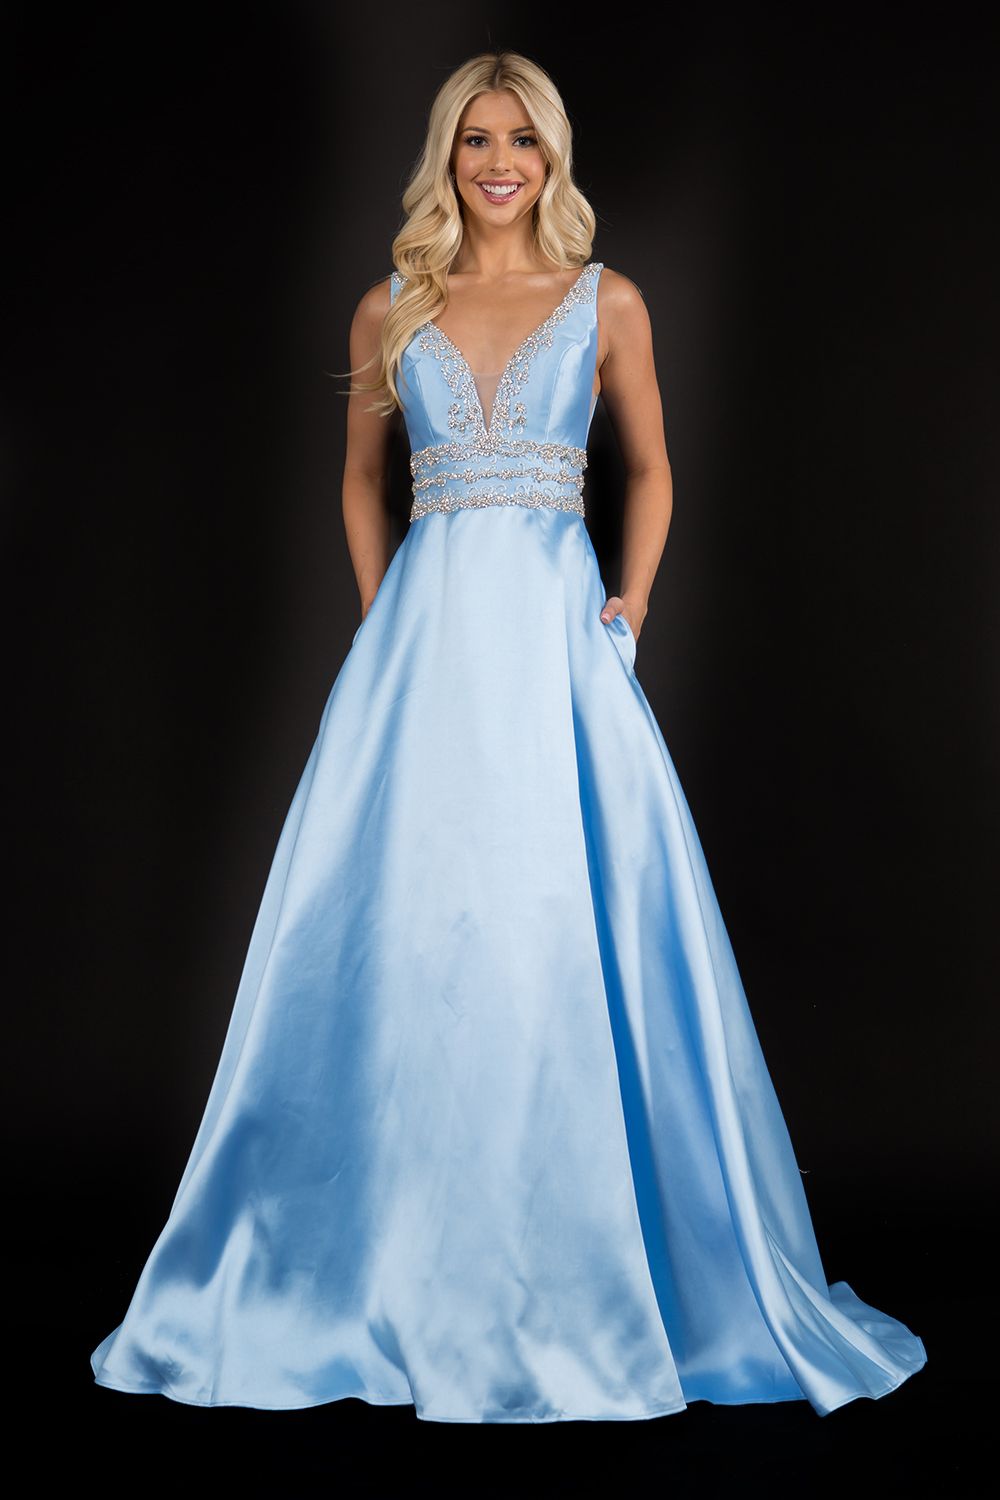 Nina Canacci 2290 Embellished plunging neckline A line prom dress embellished evening gown.  Three rows of embellishments around the waistline.  Colors:  Baby Blue, Ivory, Royal   Sizes:  8,10,12,14,16,18,20,22,24,